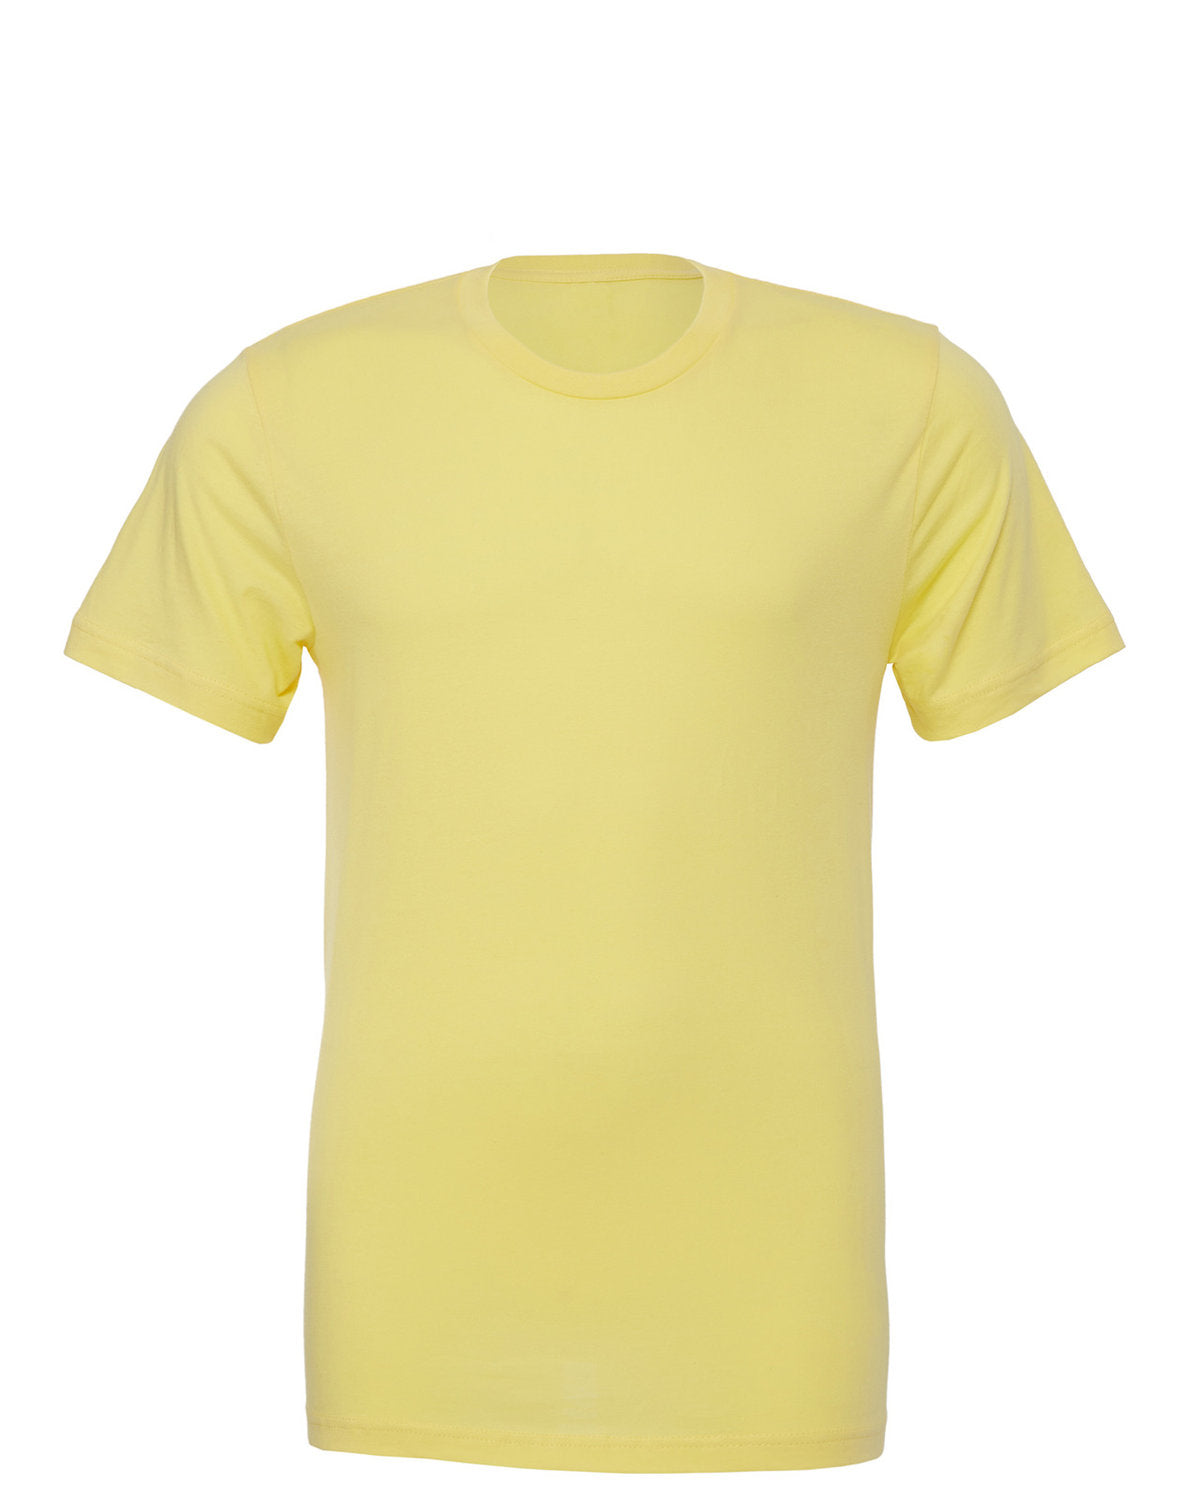 A plain, light yellow Bella Canvas t-shirt displayed against a white background, featuring a short-sleeve design, custom embroidery, and a round neckline by Show Off Your Threads.